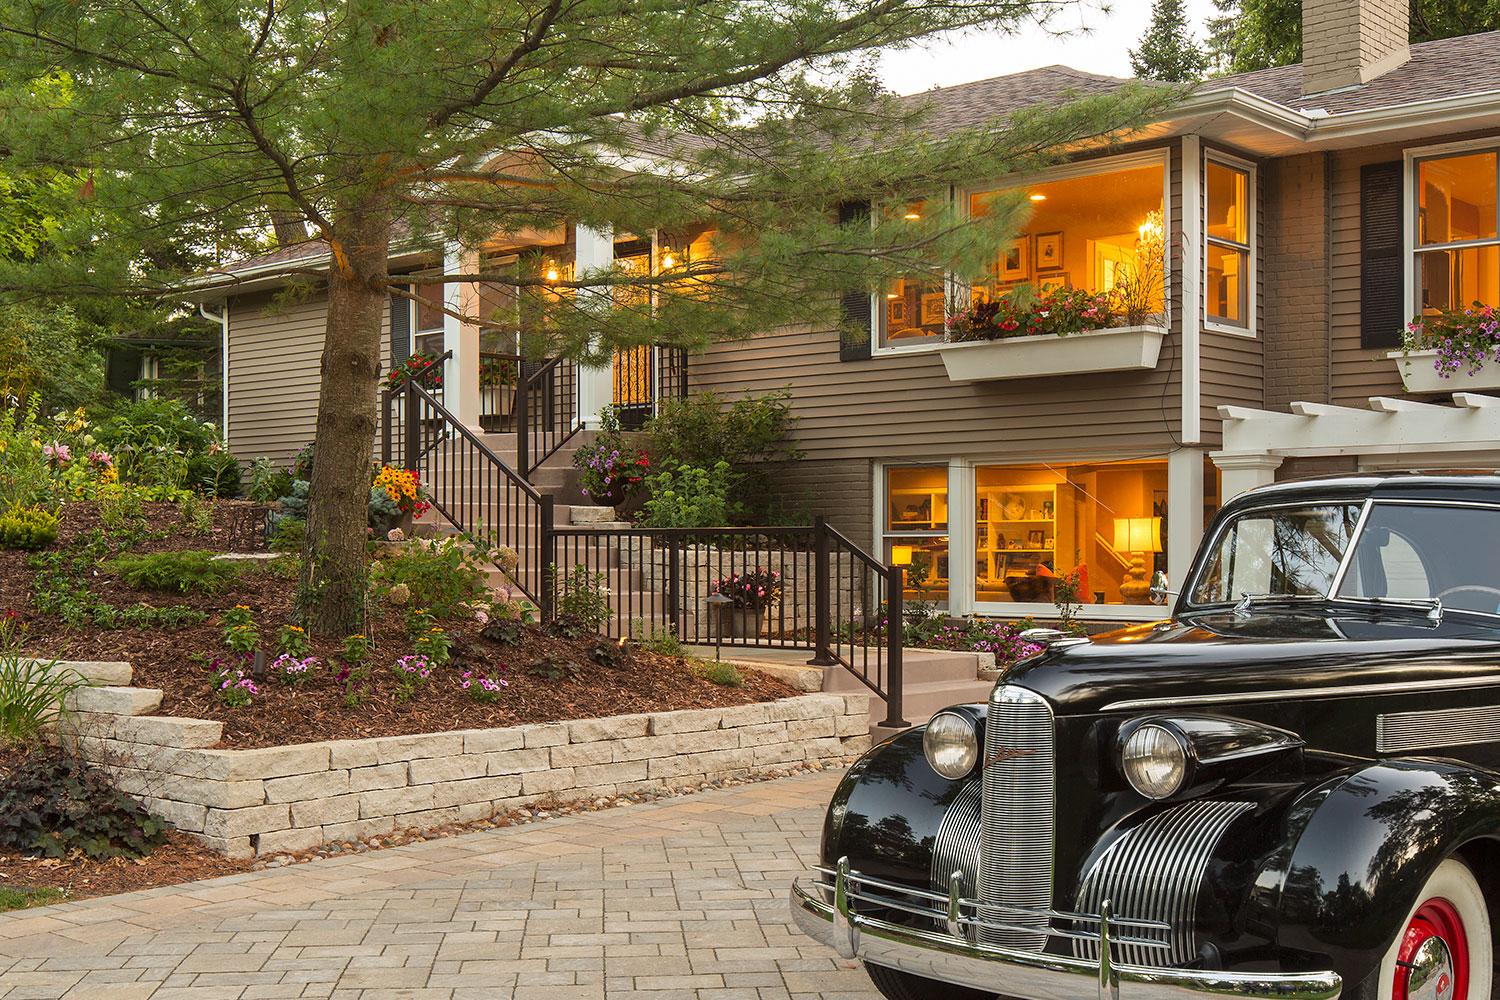 Paver driveway, limestone retaining wall, plantings, and a classic car.